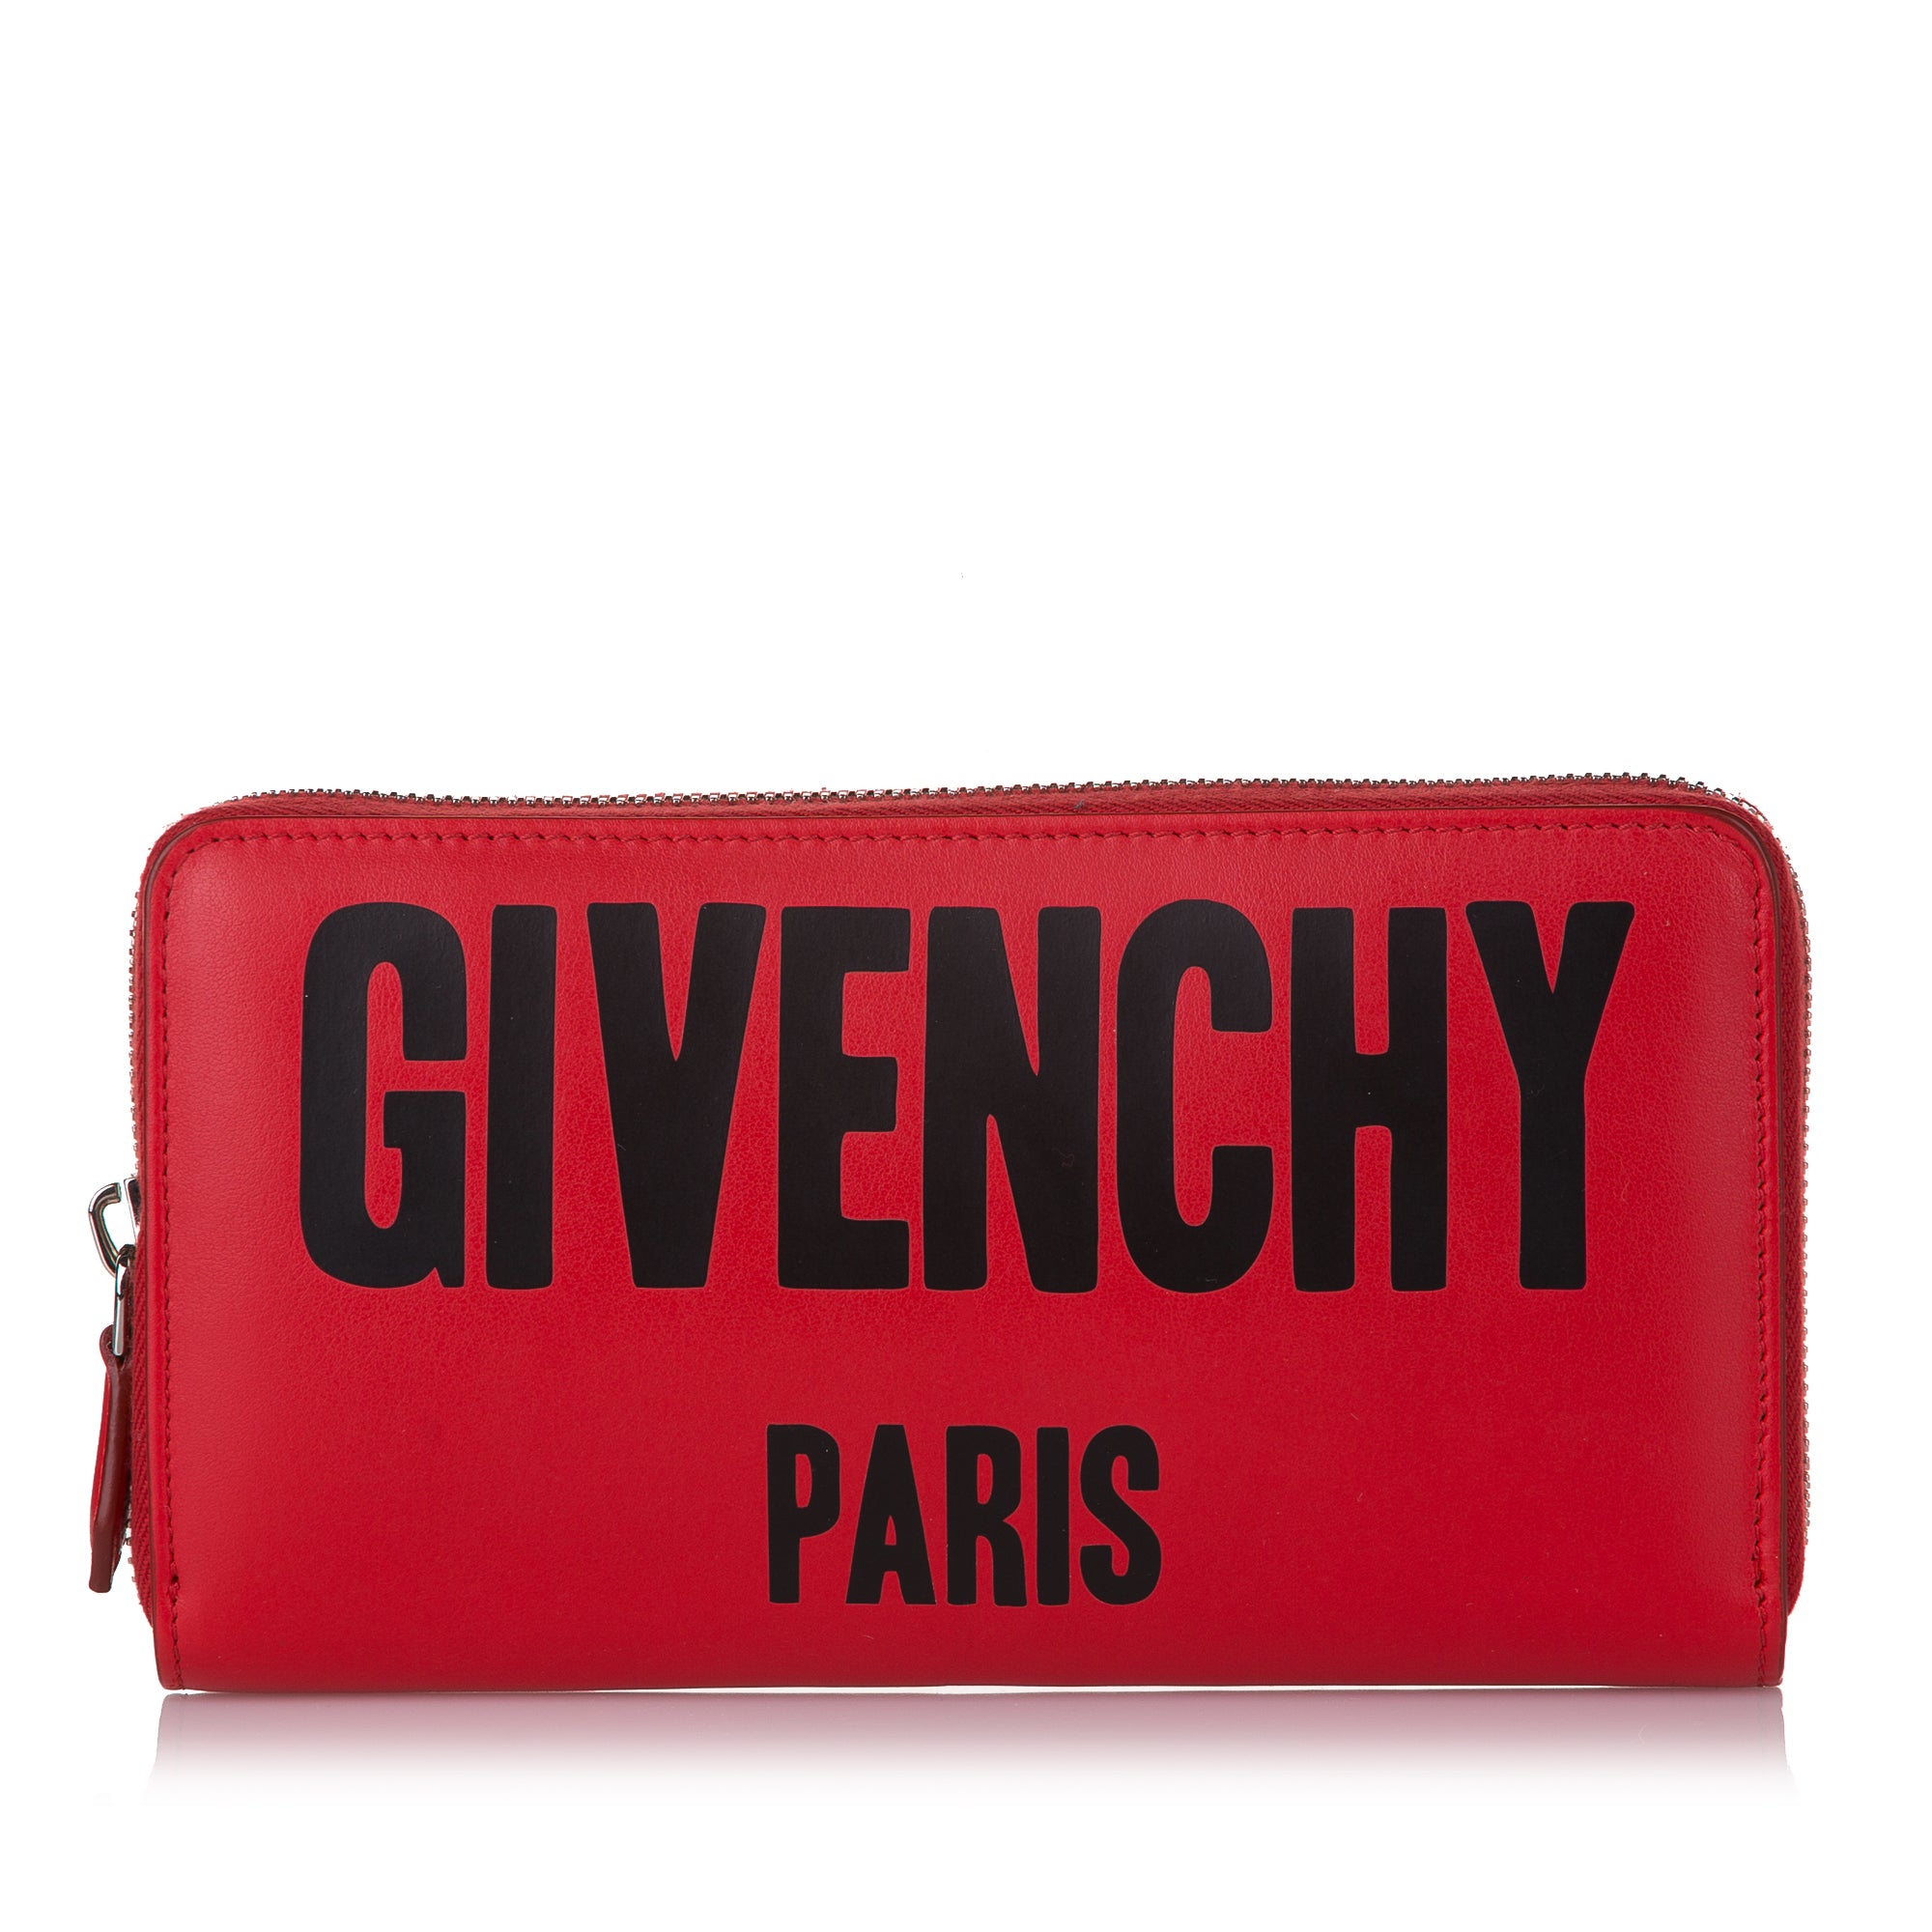 Red Givenchy Iconic Print Zip Around Leather Wallet - Designer Revival